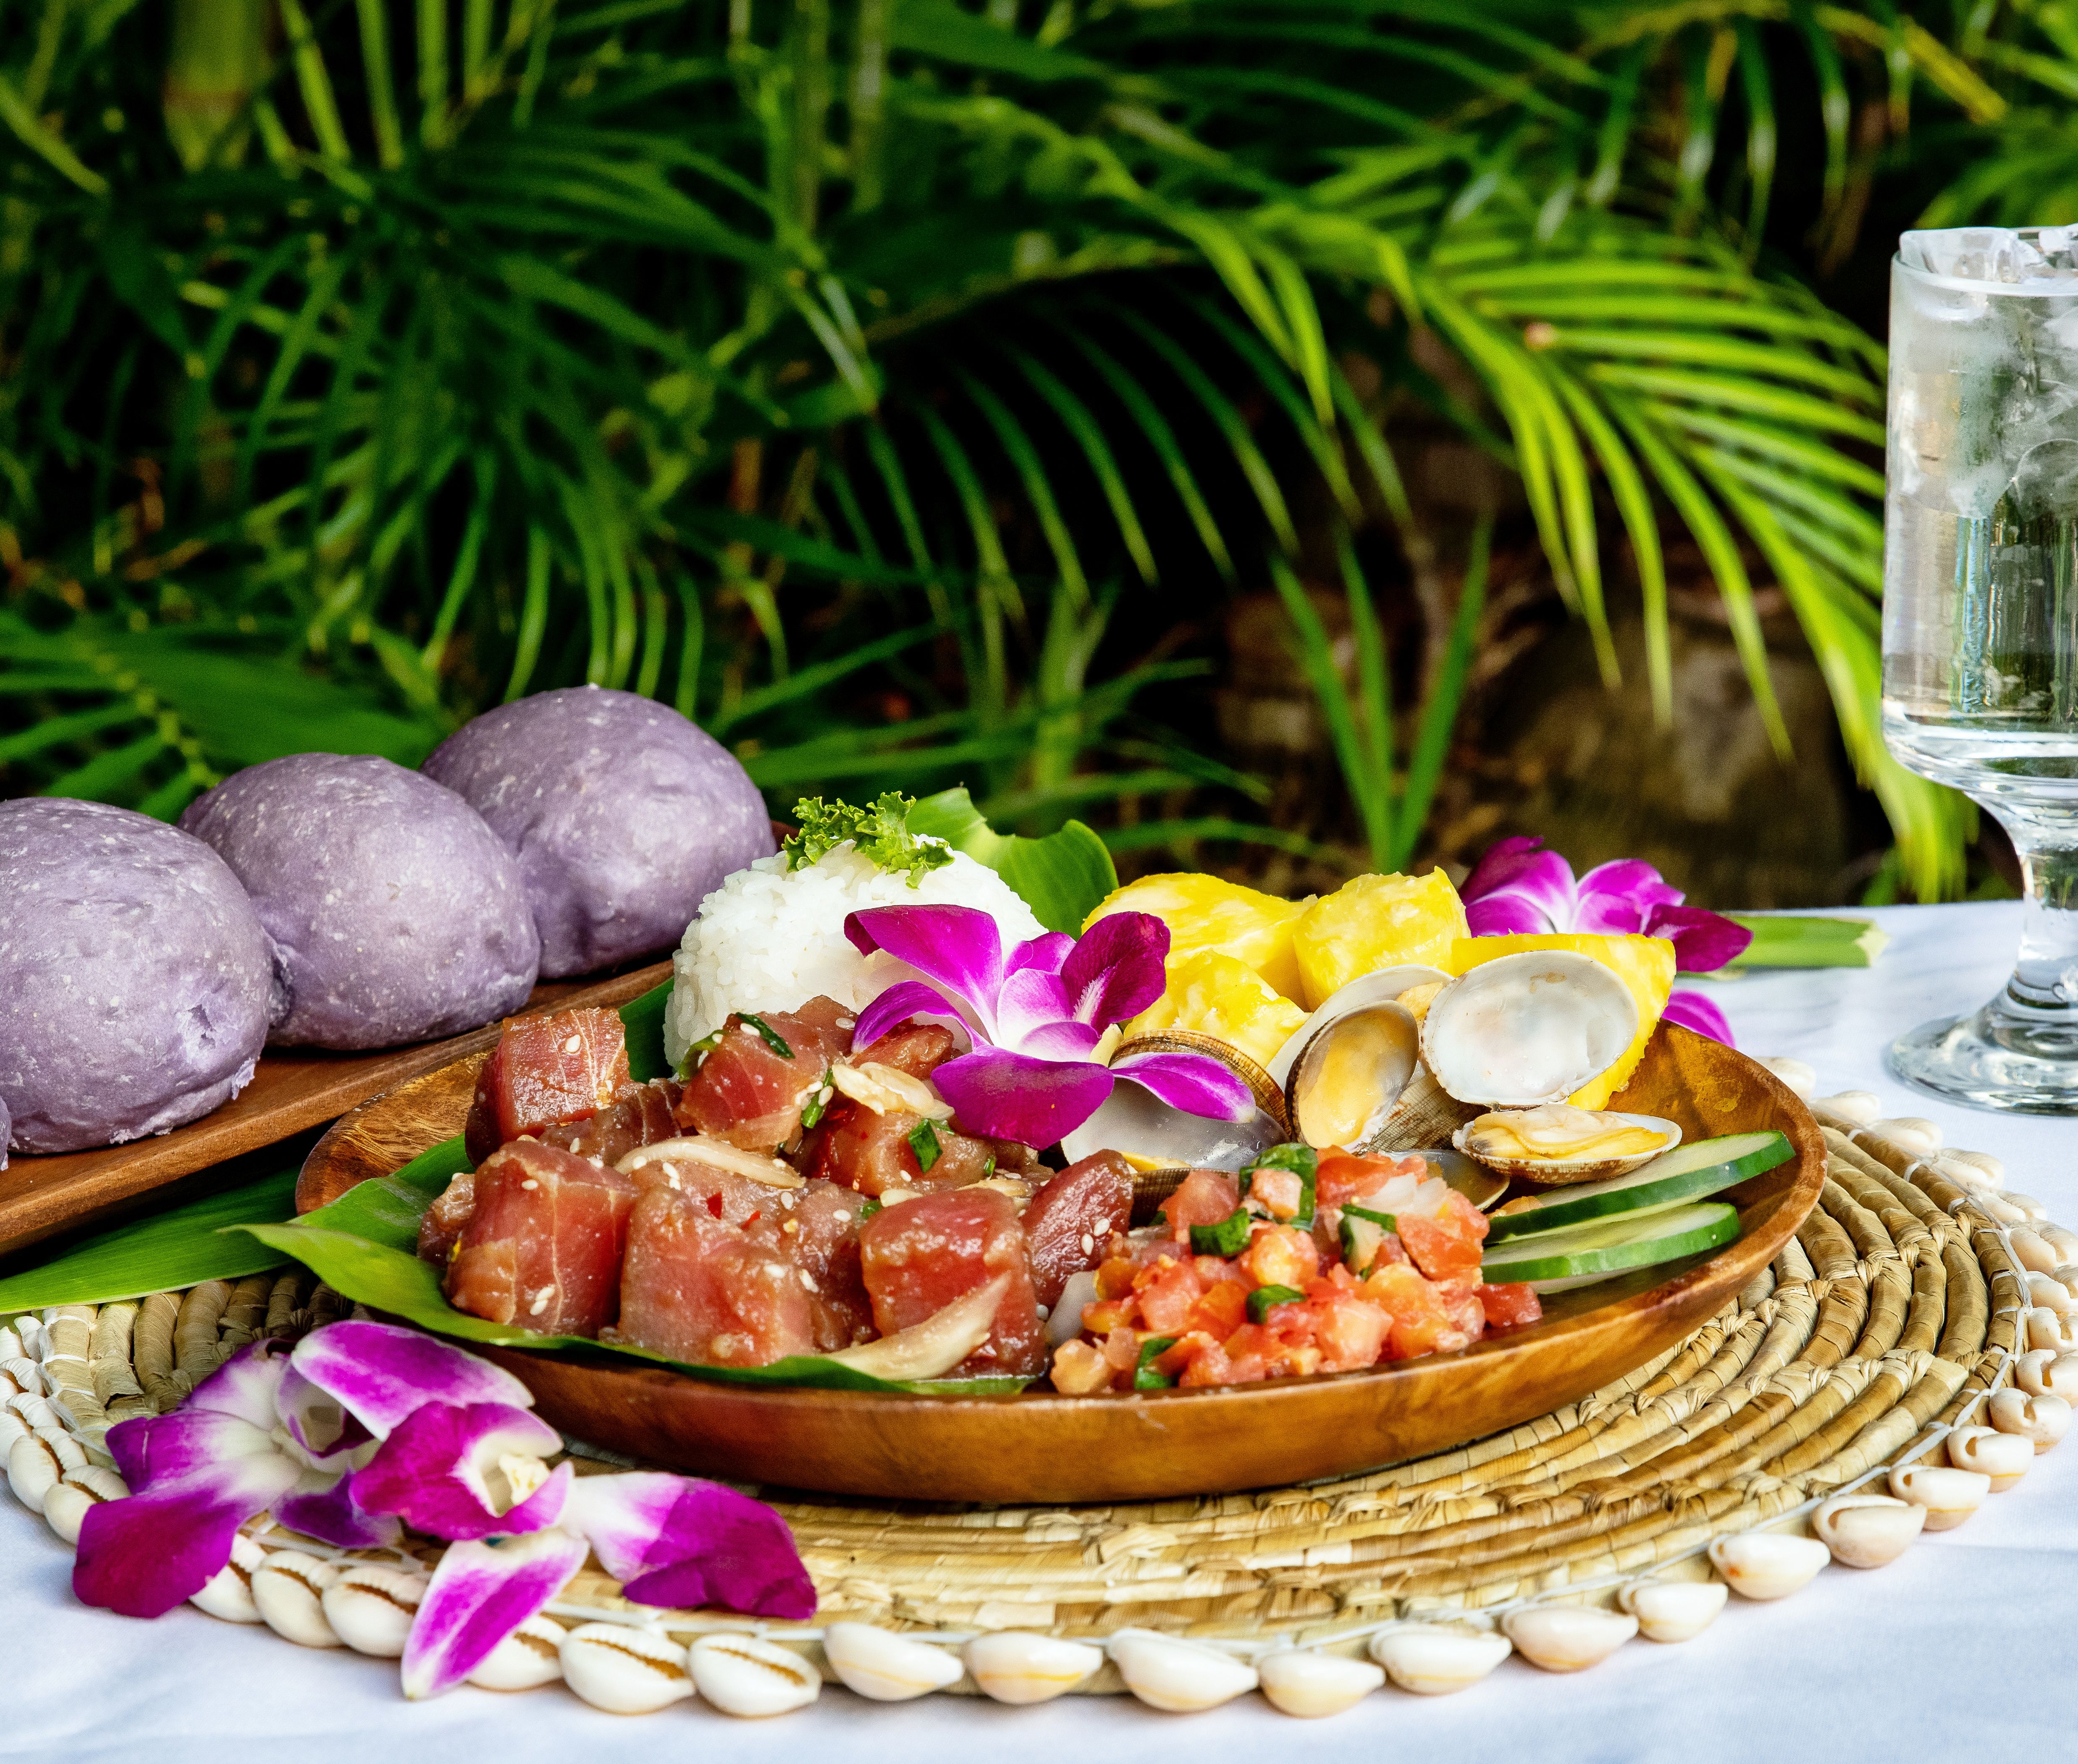 plate of luau food selection from the Alii Luau at the Polynesian Cultural Center